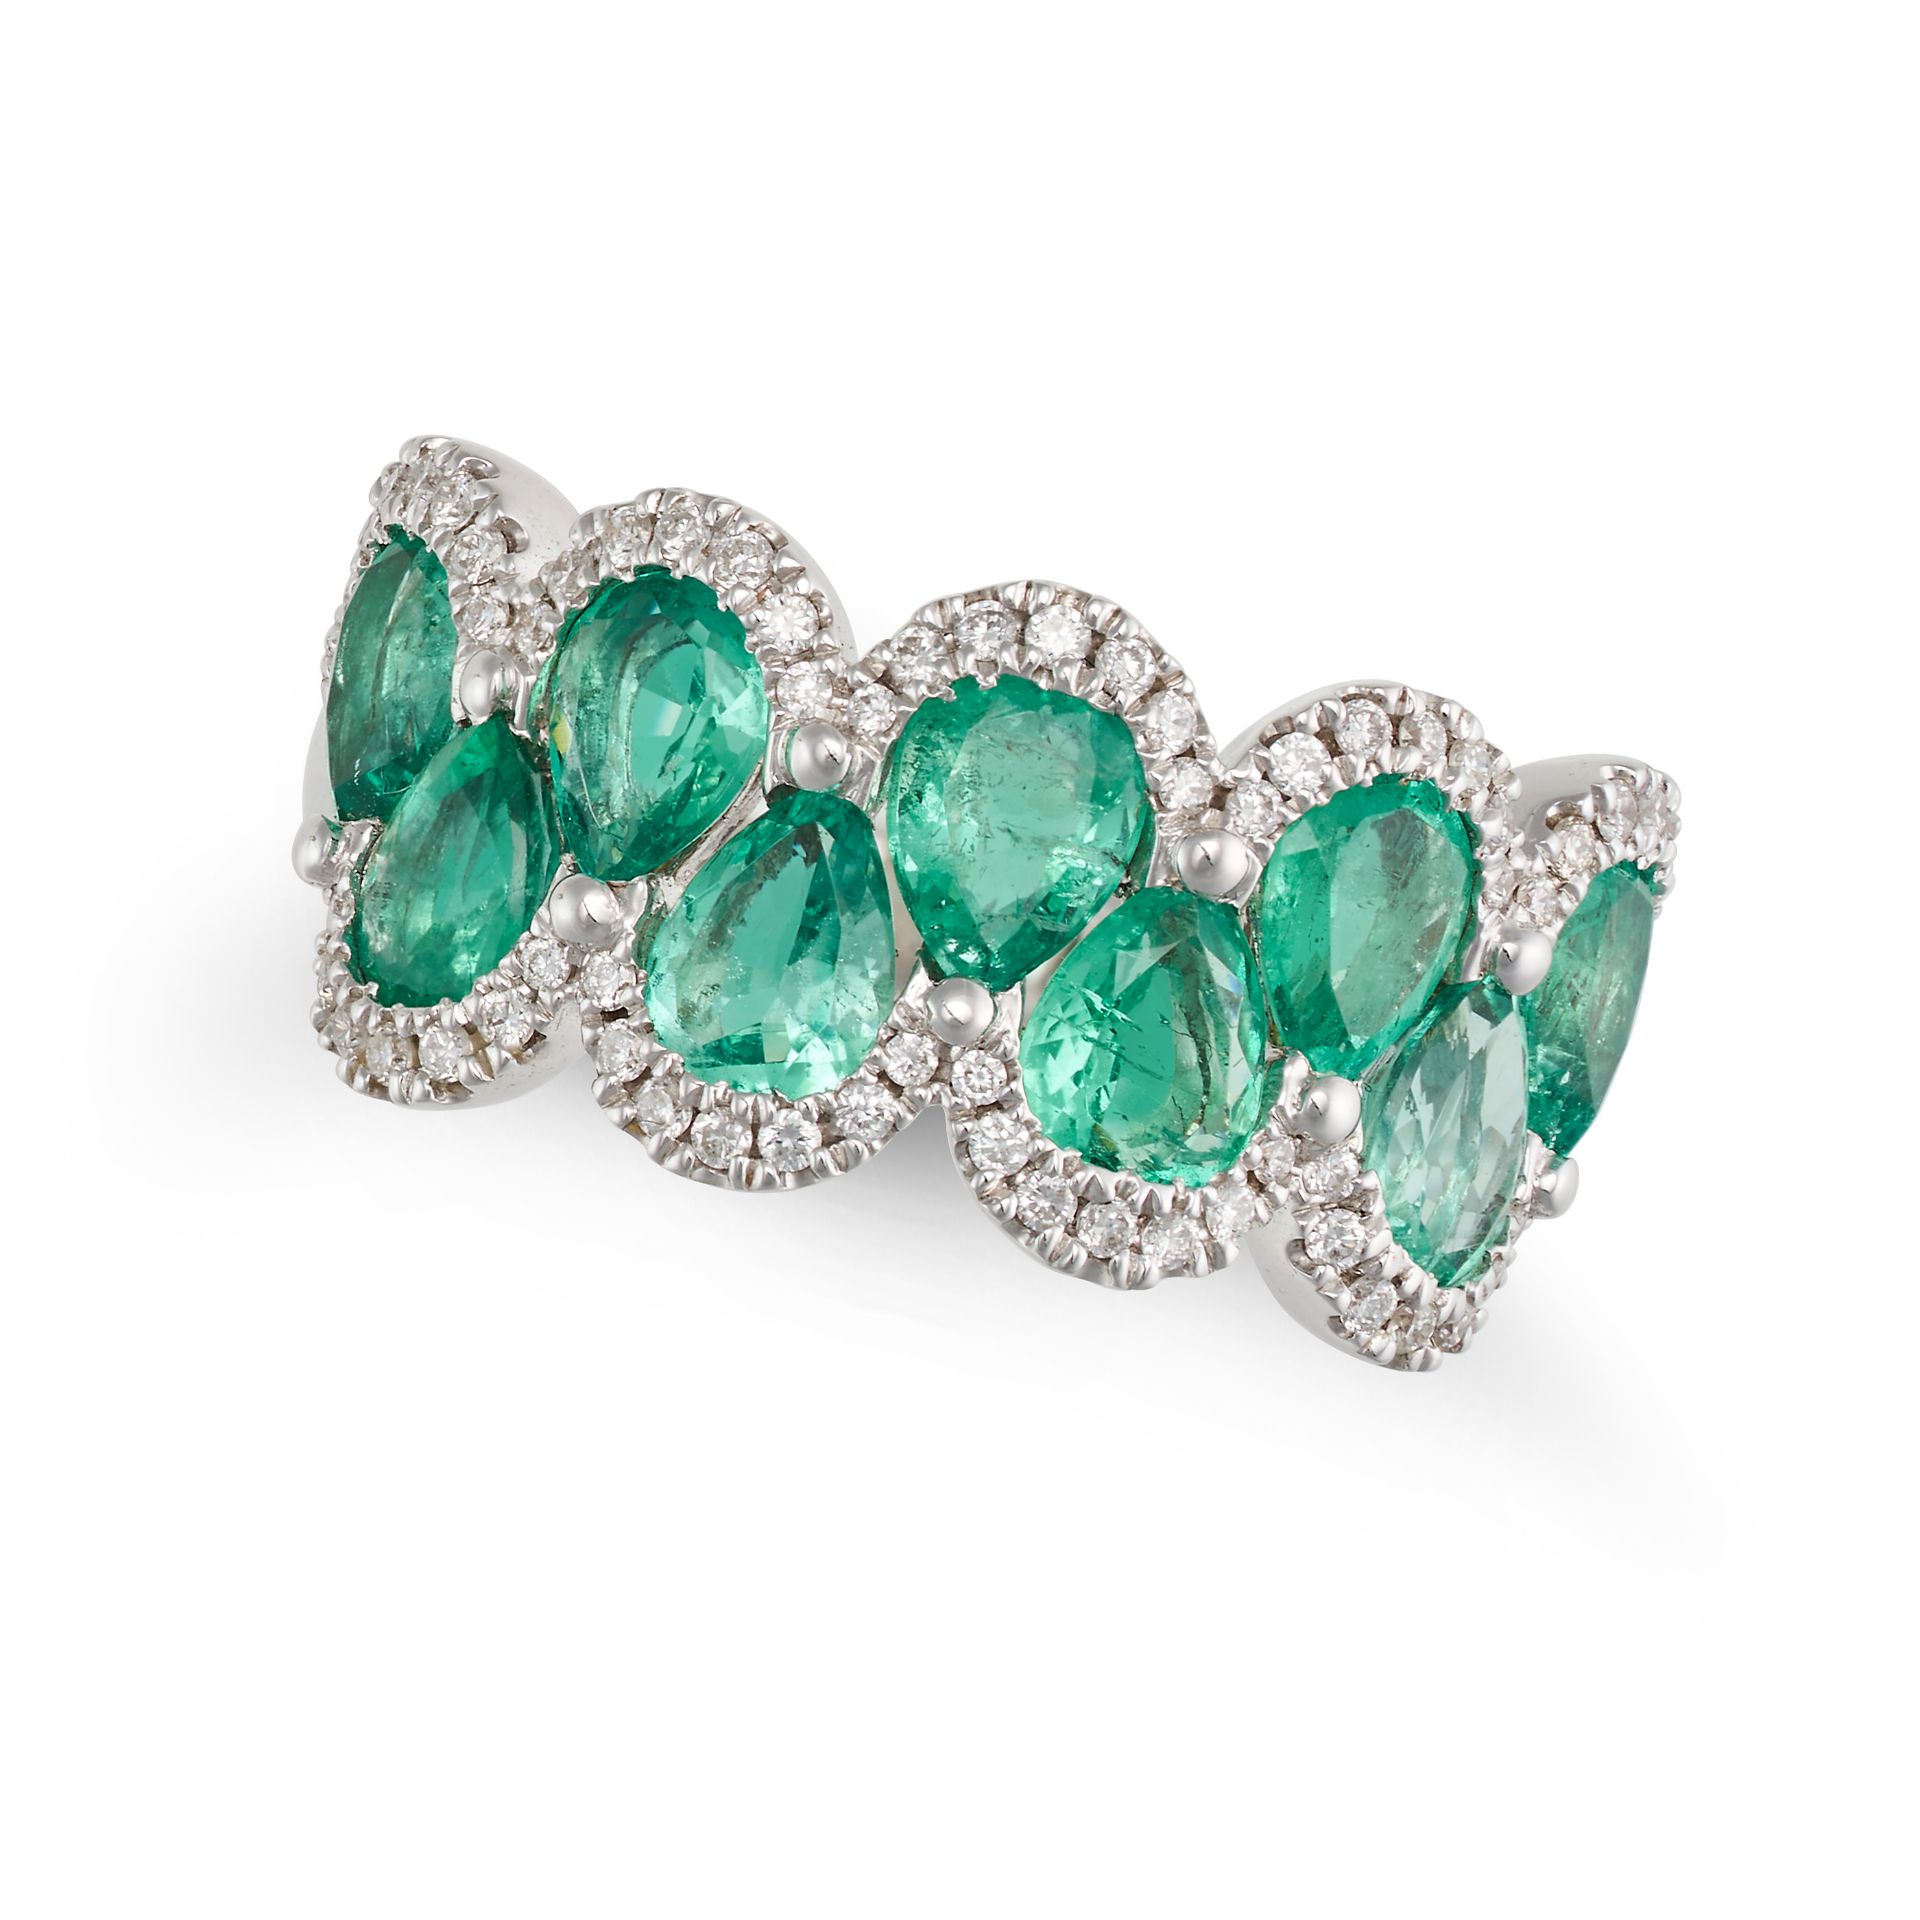 AN EMERALD AND DIAMOND DRESS RING in 18ct white gold, set with a row of pear cut emeralds accente...